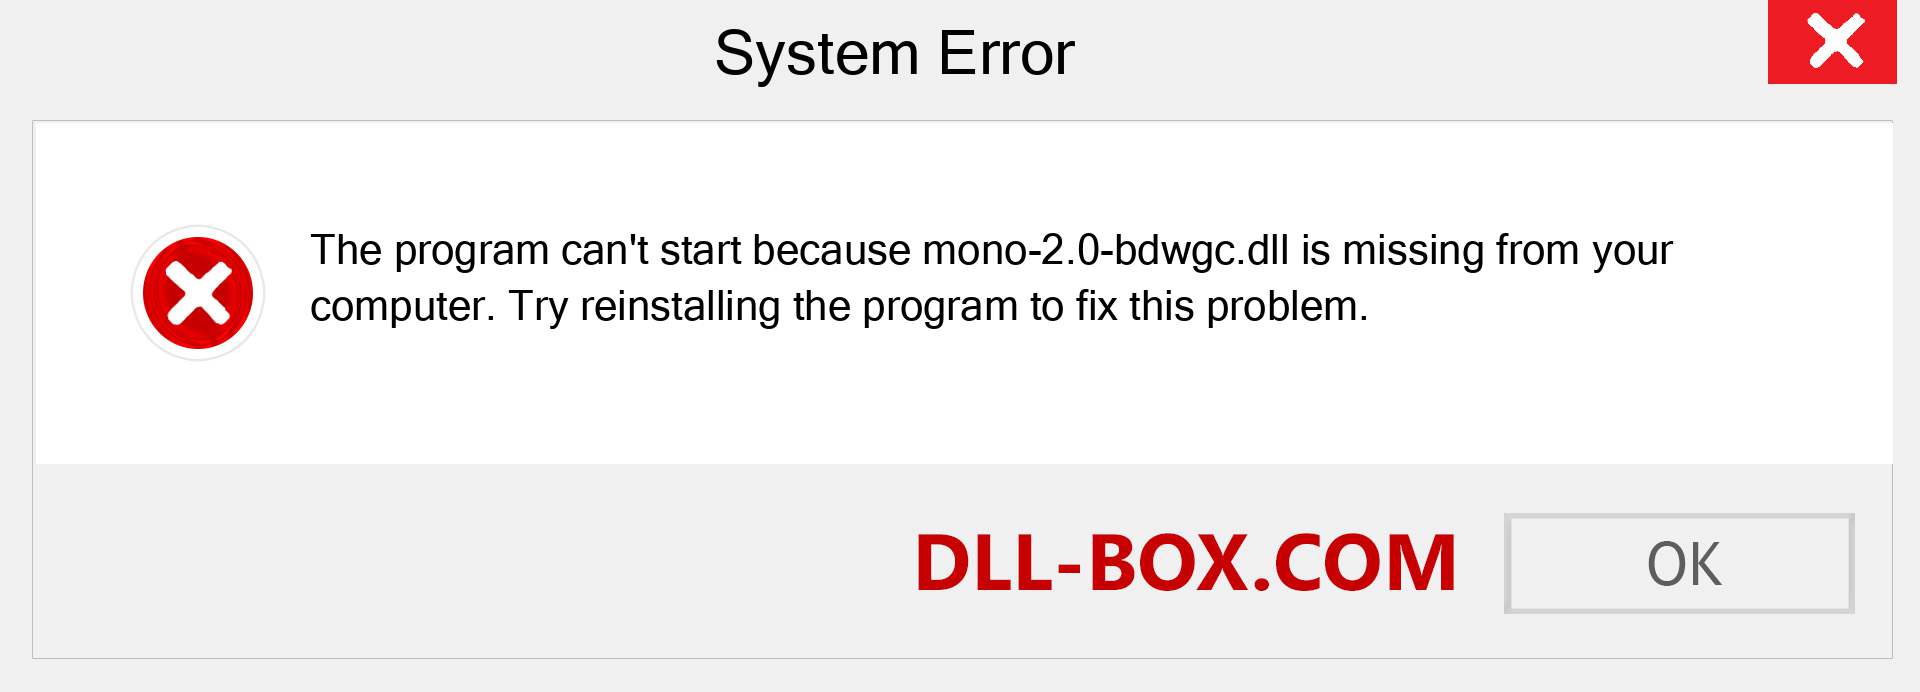  mono-2.0-bdwgc.dll file is missing?. Download for Windows 7, 8, 10 - Fix  mono-2.0-bdwgc dll Missing Error on Windows, photos, images